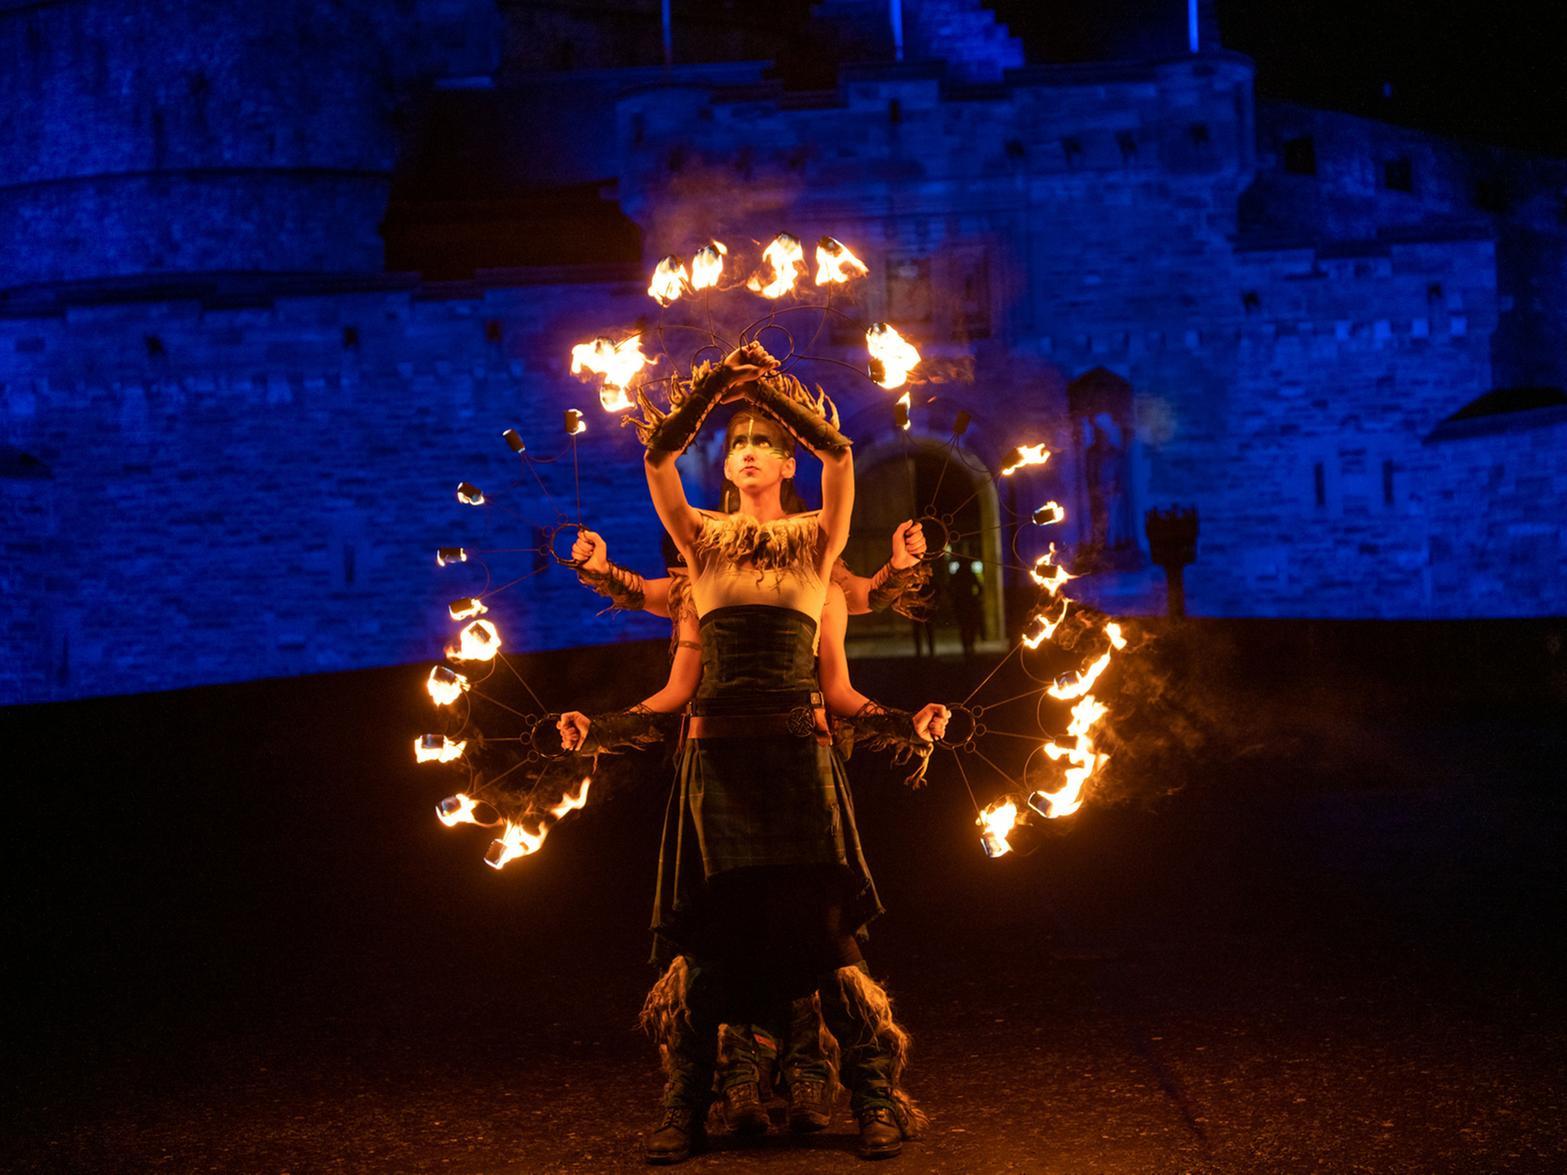 Crowds were wowed by the fire-throwing artists.